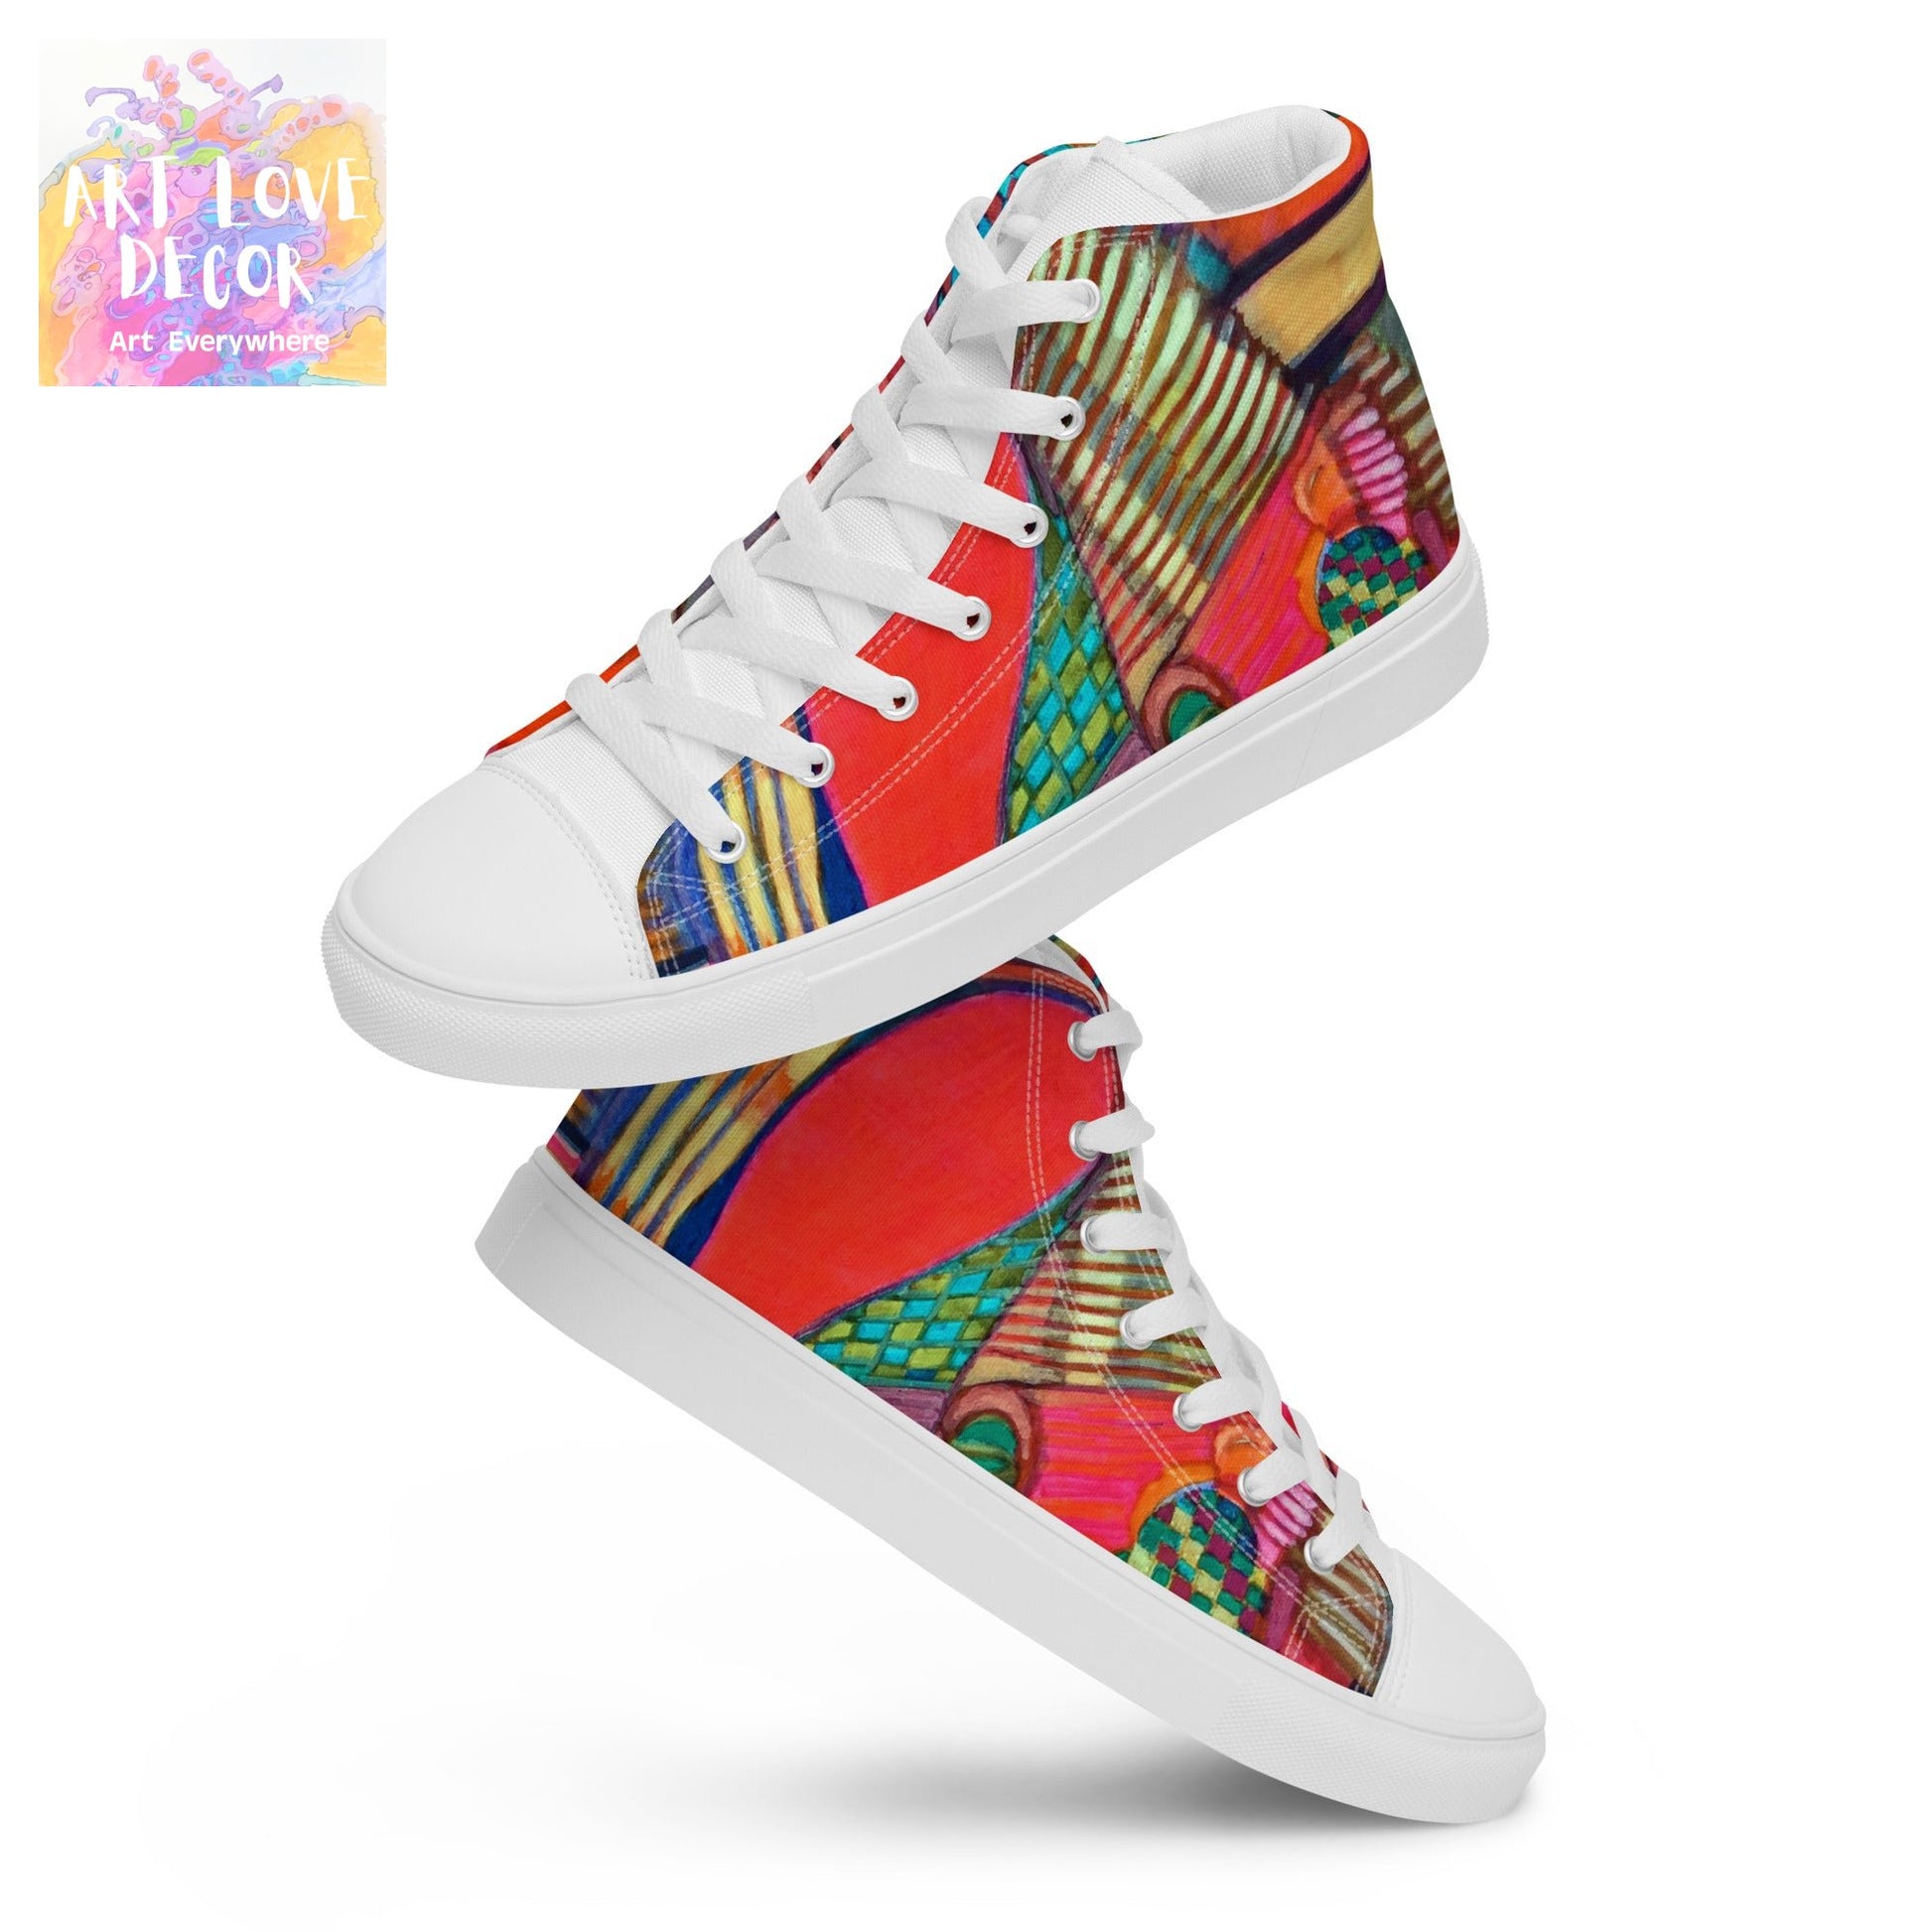 Come Together Women’s high top shoes - Art Love Decor